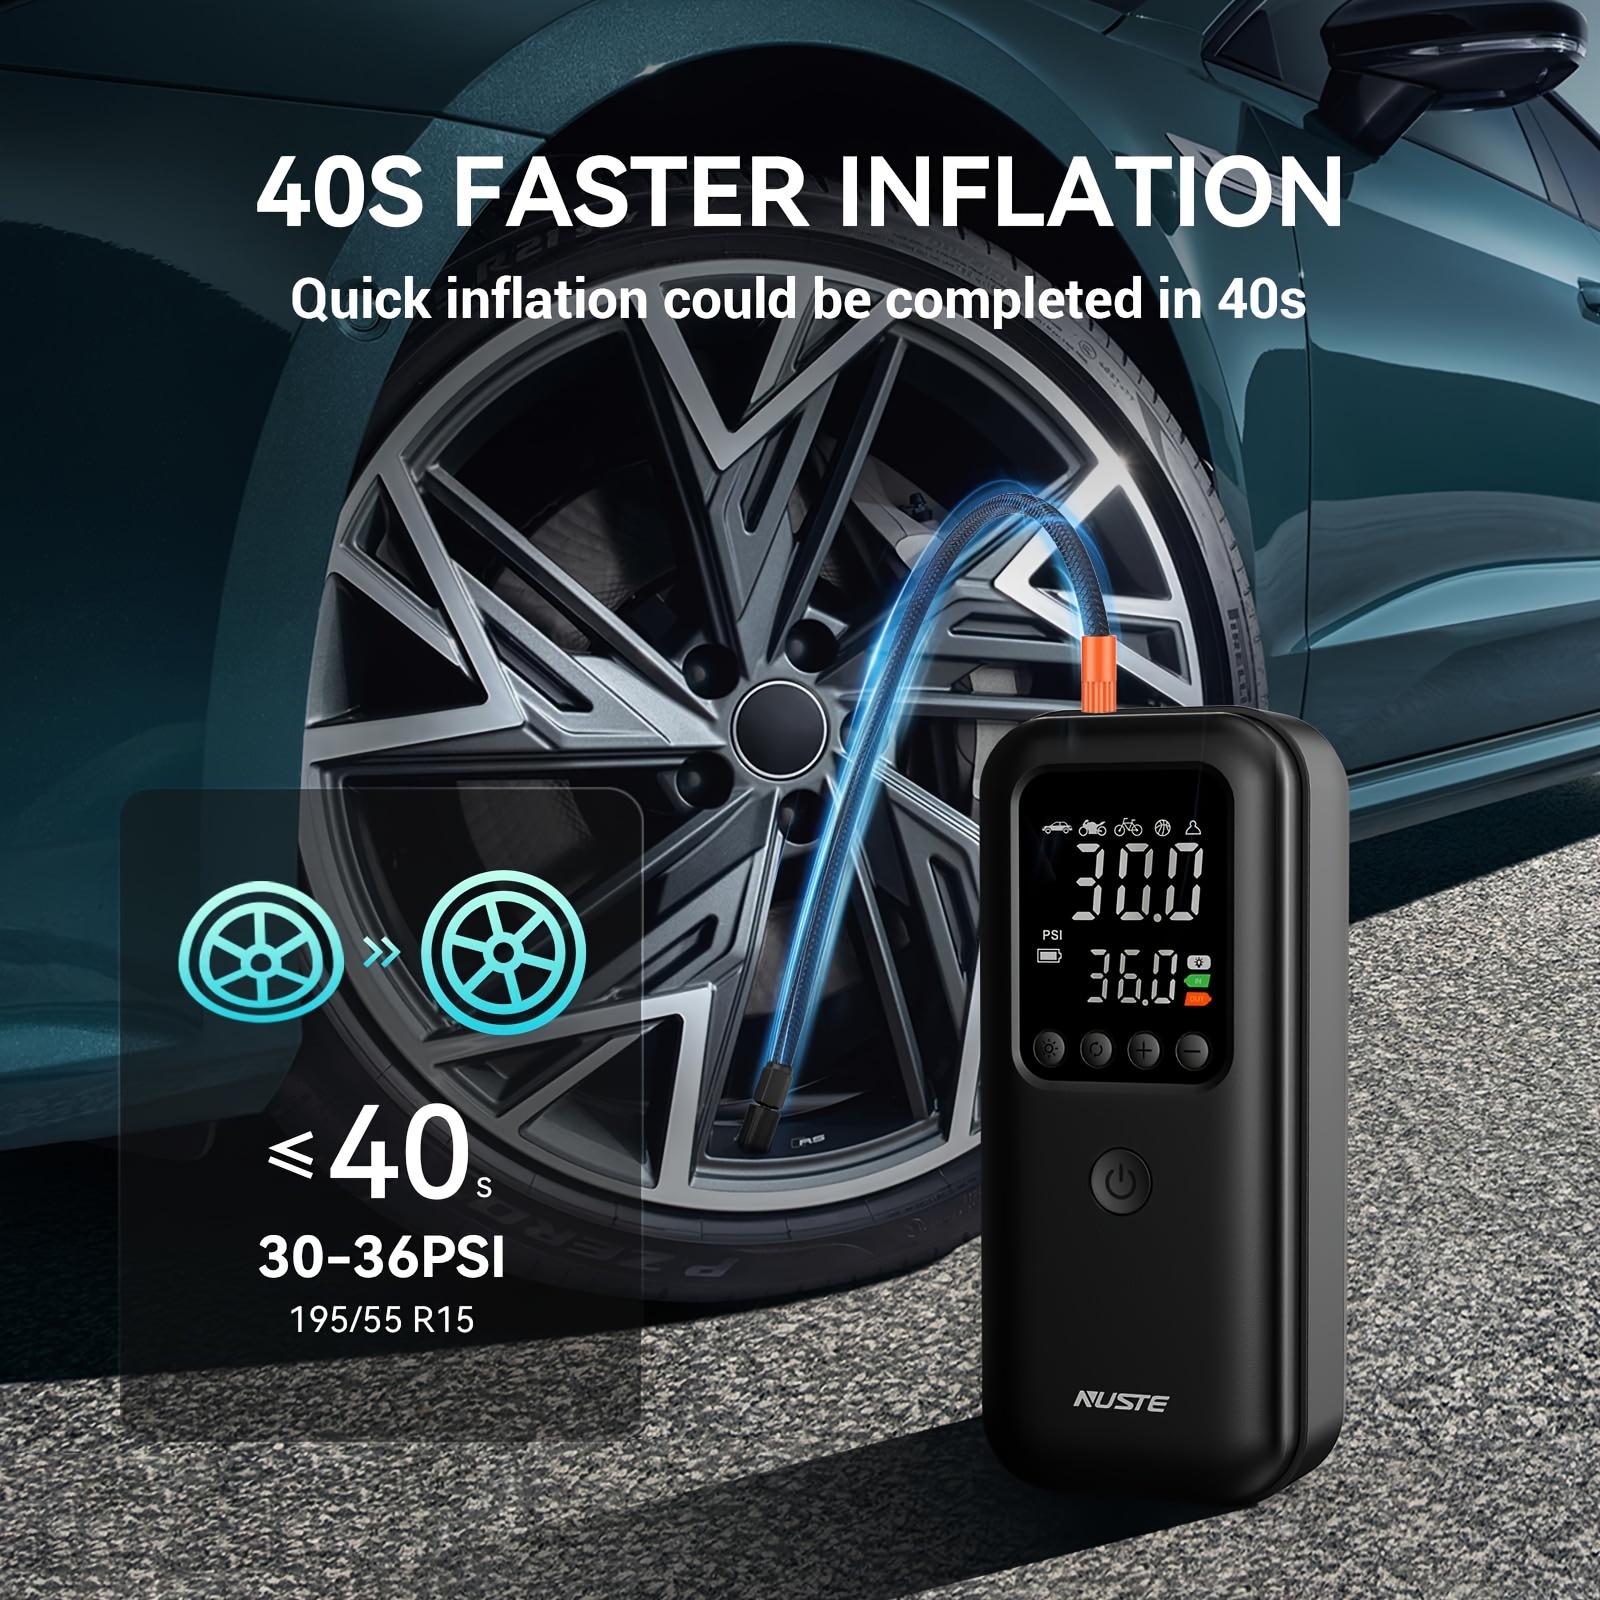 

Cordless Tire Inflator Portable Air Compressor, 3x Faster Air Pump 20000mah For Inflatables, 12v Dc Bike Pump Digital 150psi Pressure Gauge Led Light For Car, Bicycle, Motorcycle, Ball